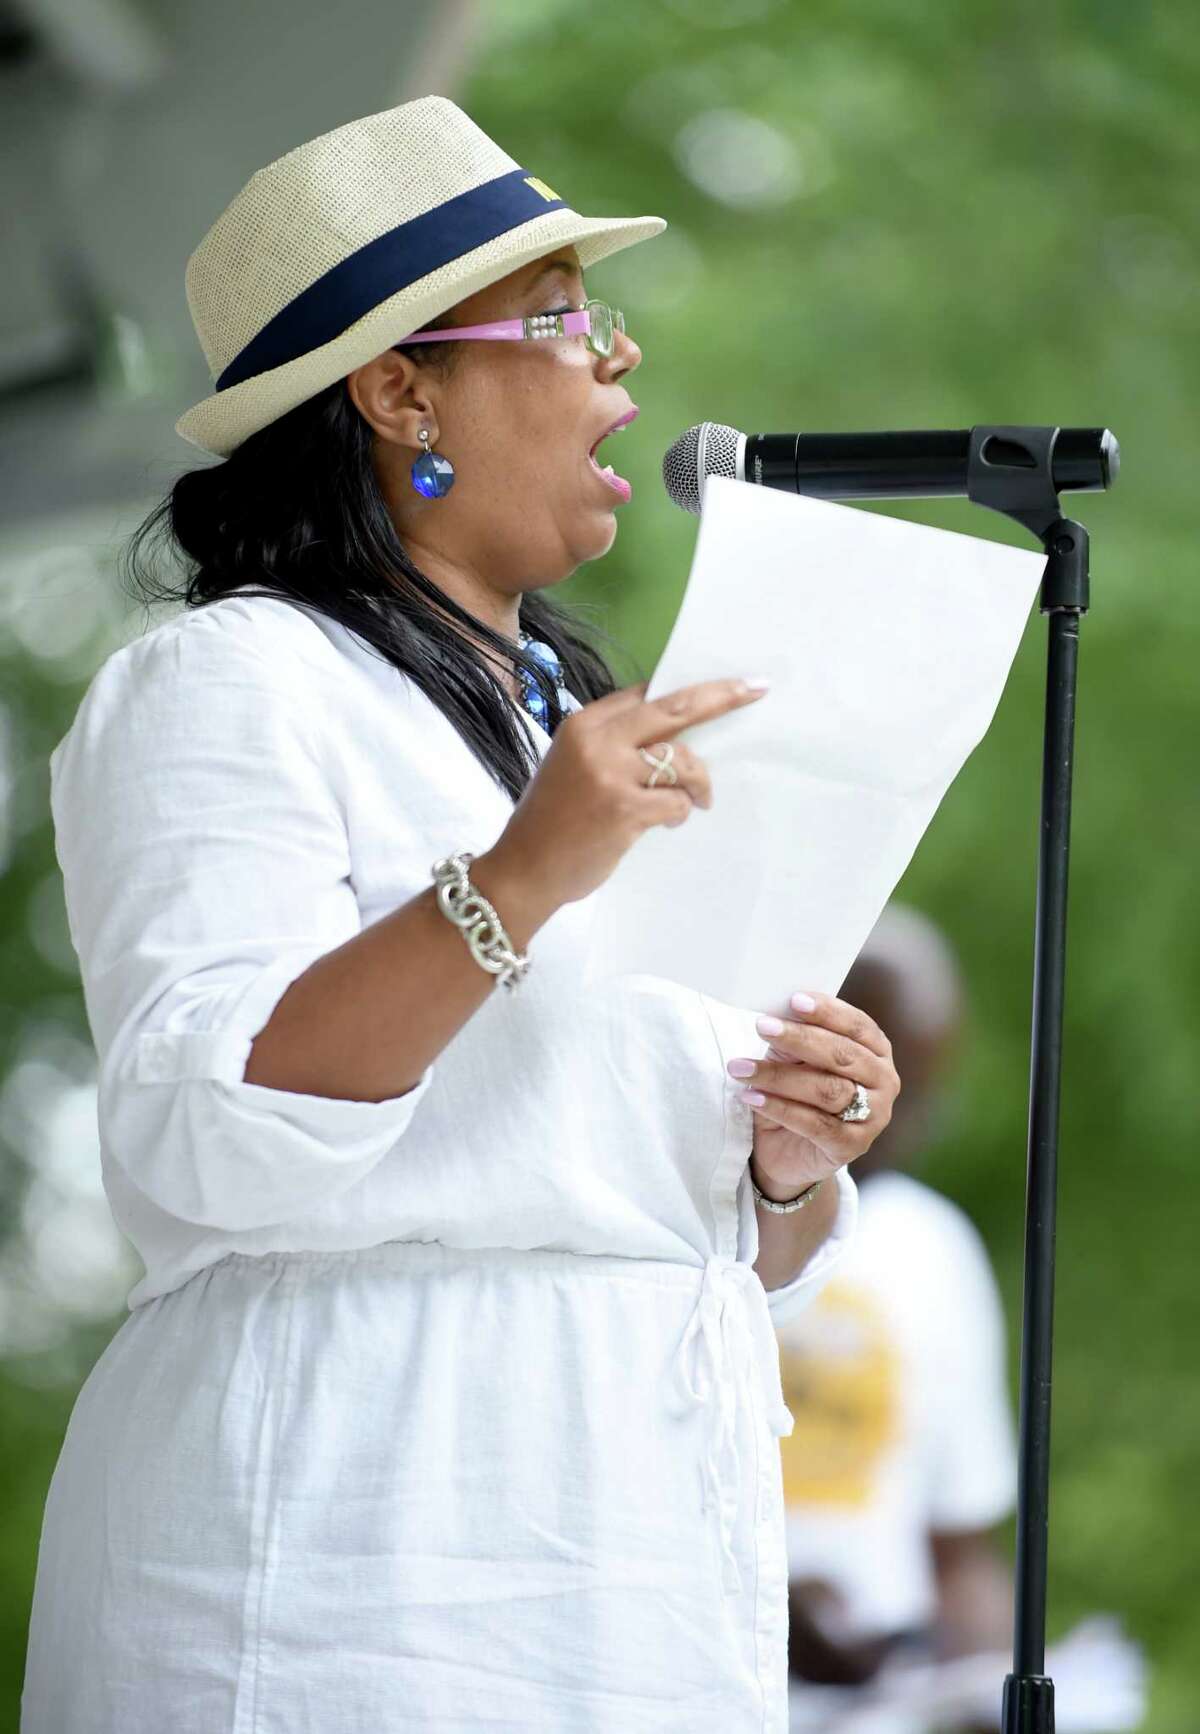 Dori Dumas, president of the Greater New Haven branch of the NAACP, speaks at a rally on the New Haven Green following a Silent Protest Parade that started on Dixwell Ave. on 7/29/2017. "Juneteenth is a celebration of history, freedom and liberation celebrated annually on June 19 to commemorate the end of slavery for the blacks enslaved in Texas who learned about the Emancipation Proclamation on June 19, 1865.  On this day in 1865, 2.5 years after the proclamation, Union soldiers delivered the news to the still-enslaved people, and their immediate reaction was jubilation and celebration. The celebration and honor of the right of freedom have been upheld by many of the African Americans in our country.    Juneteenth marks our country’s second independence day. It is celebrated and emphasizes education and achievement. Still, it is also a time for reflection. It is used as a reminder of the sobering, dark history of slavery, and the continuous fight for equality, justice and civil rights. Although many in the African American Community have celebrated Juneteenth for years, many white Americans are unaware of its existence. President Donald Trump’s original plan to hold a campaign rally on June 19 in Tulsa, Oklahoma, was interpreted by many to be an intentional dousing of gasoline on a burning America. 